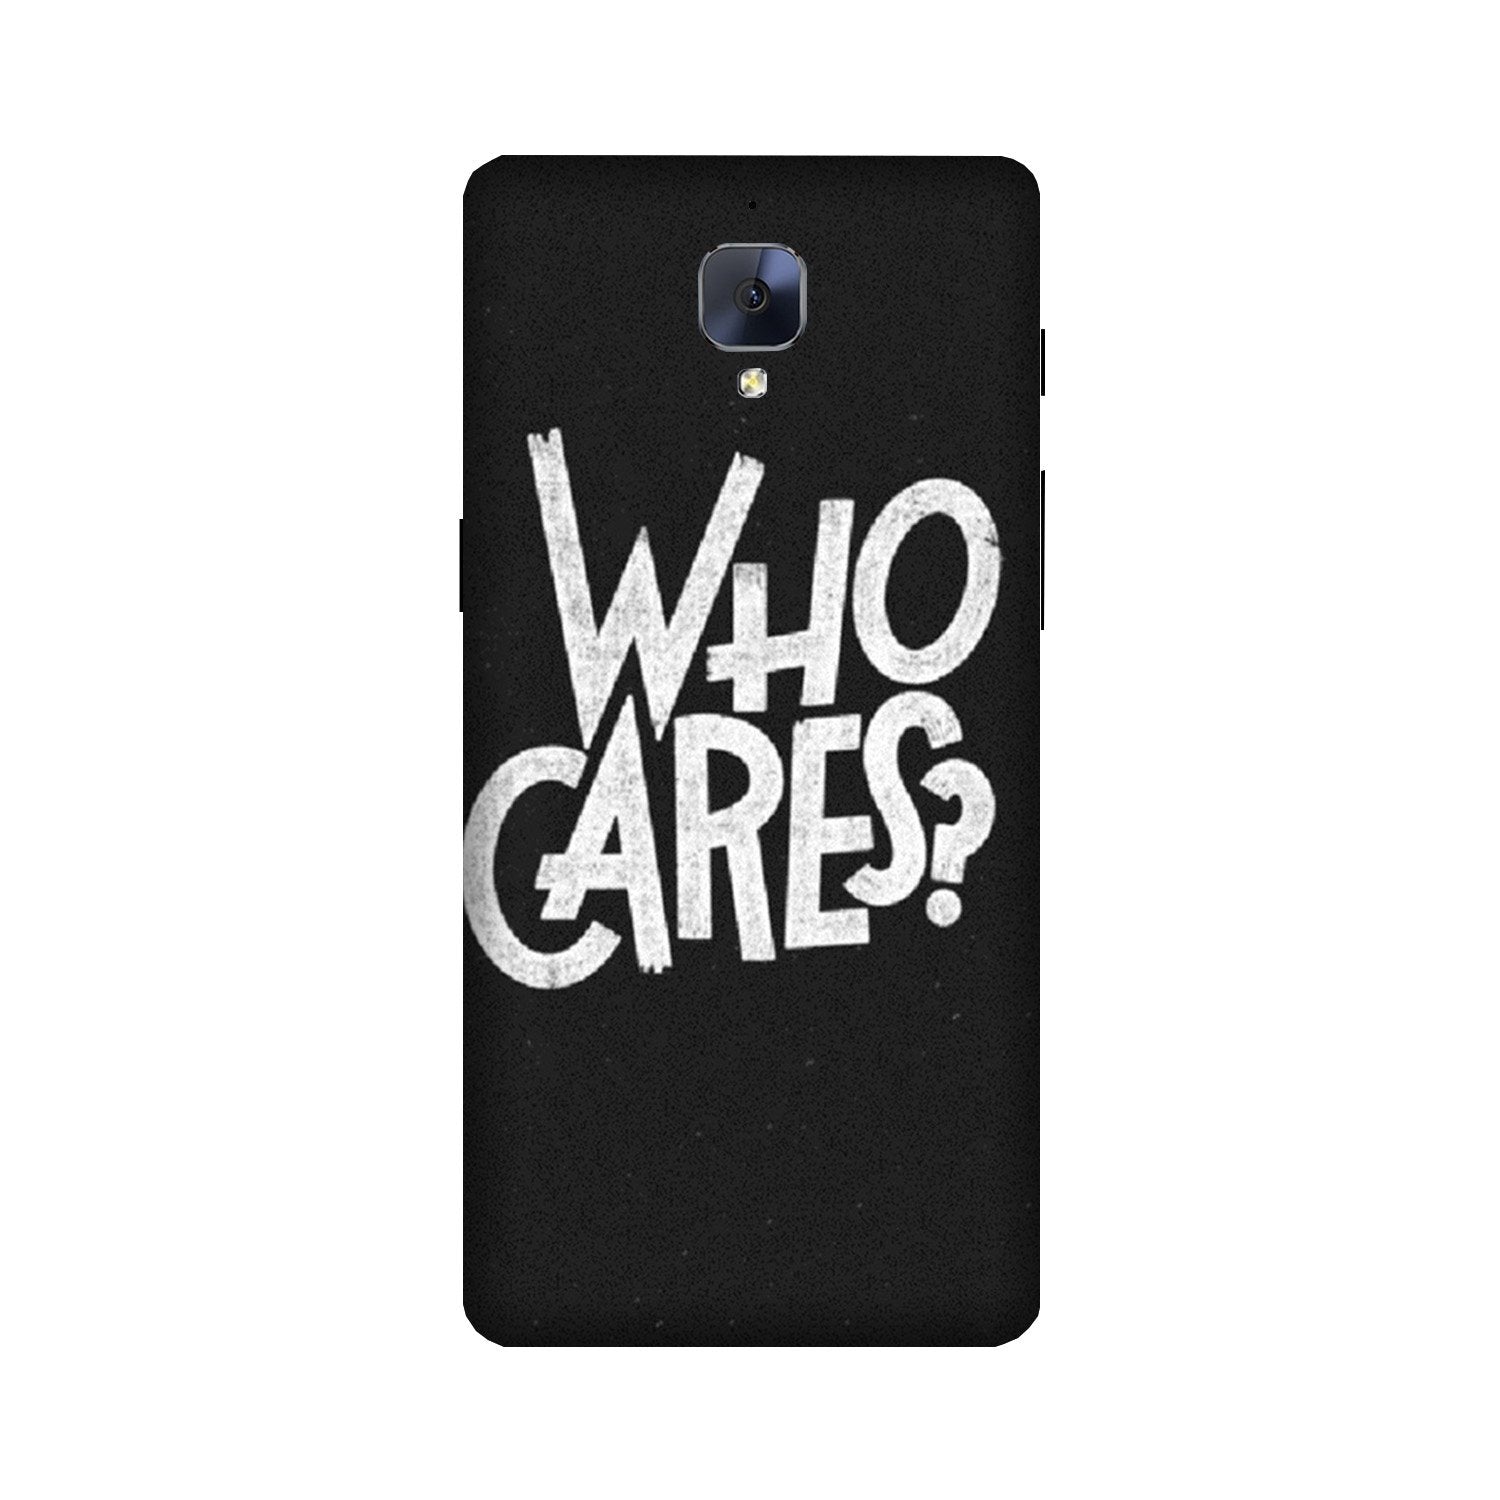 Who Cares Case for OnePlus 3/ 3T